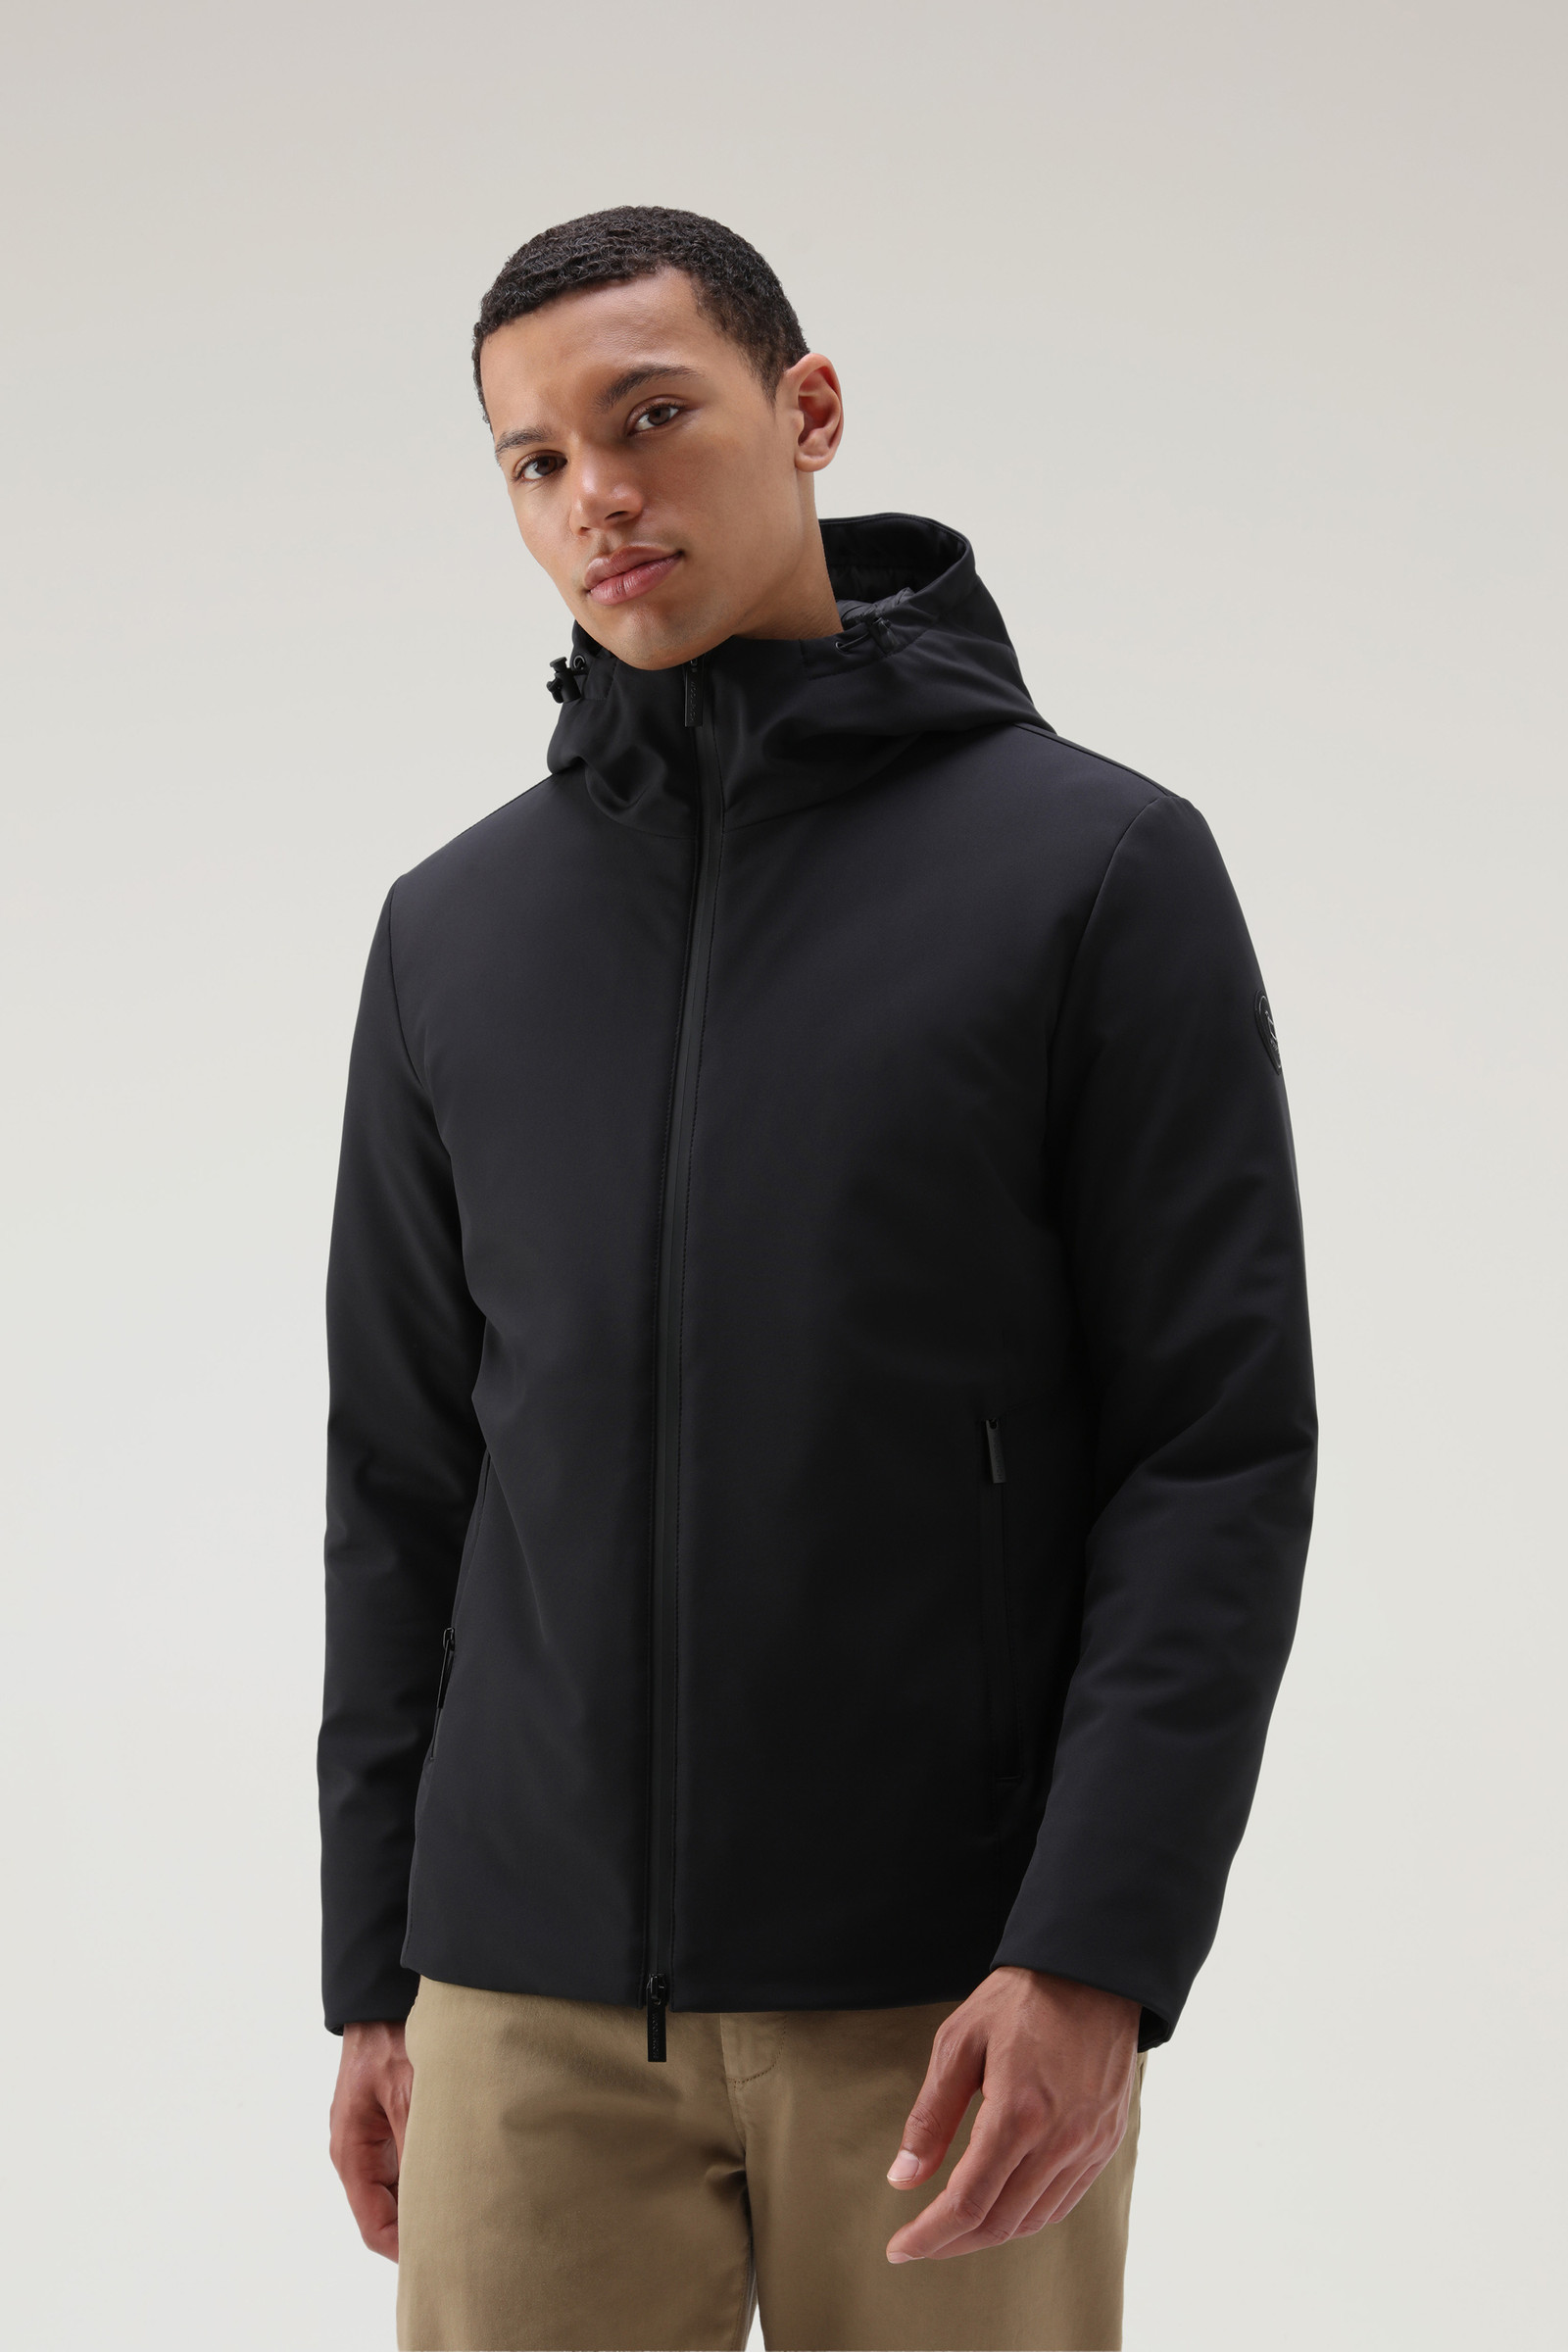 Men's Pacific Softshell Jacket Black | Woolrich USA